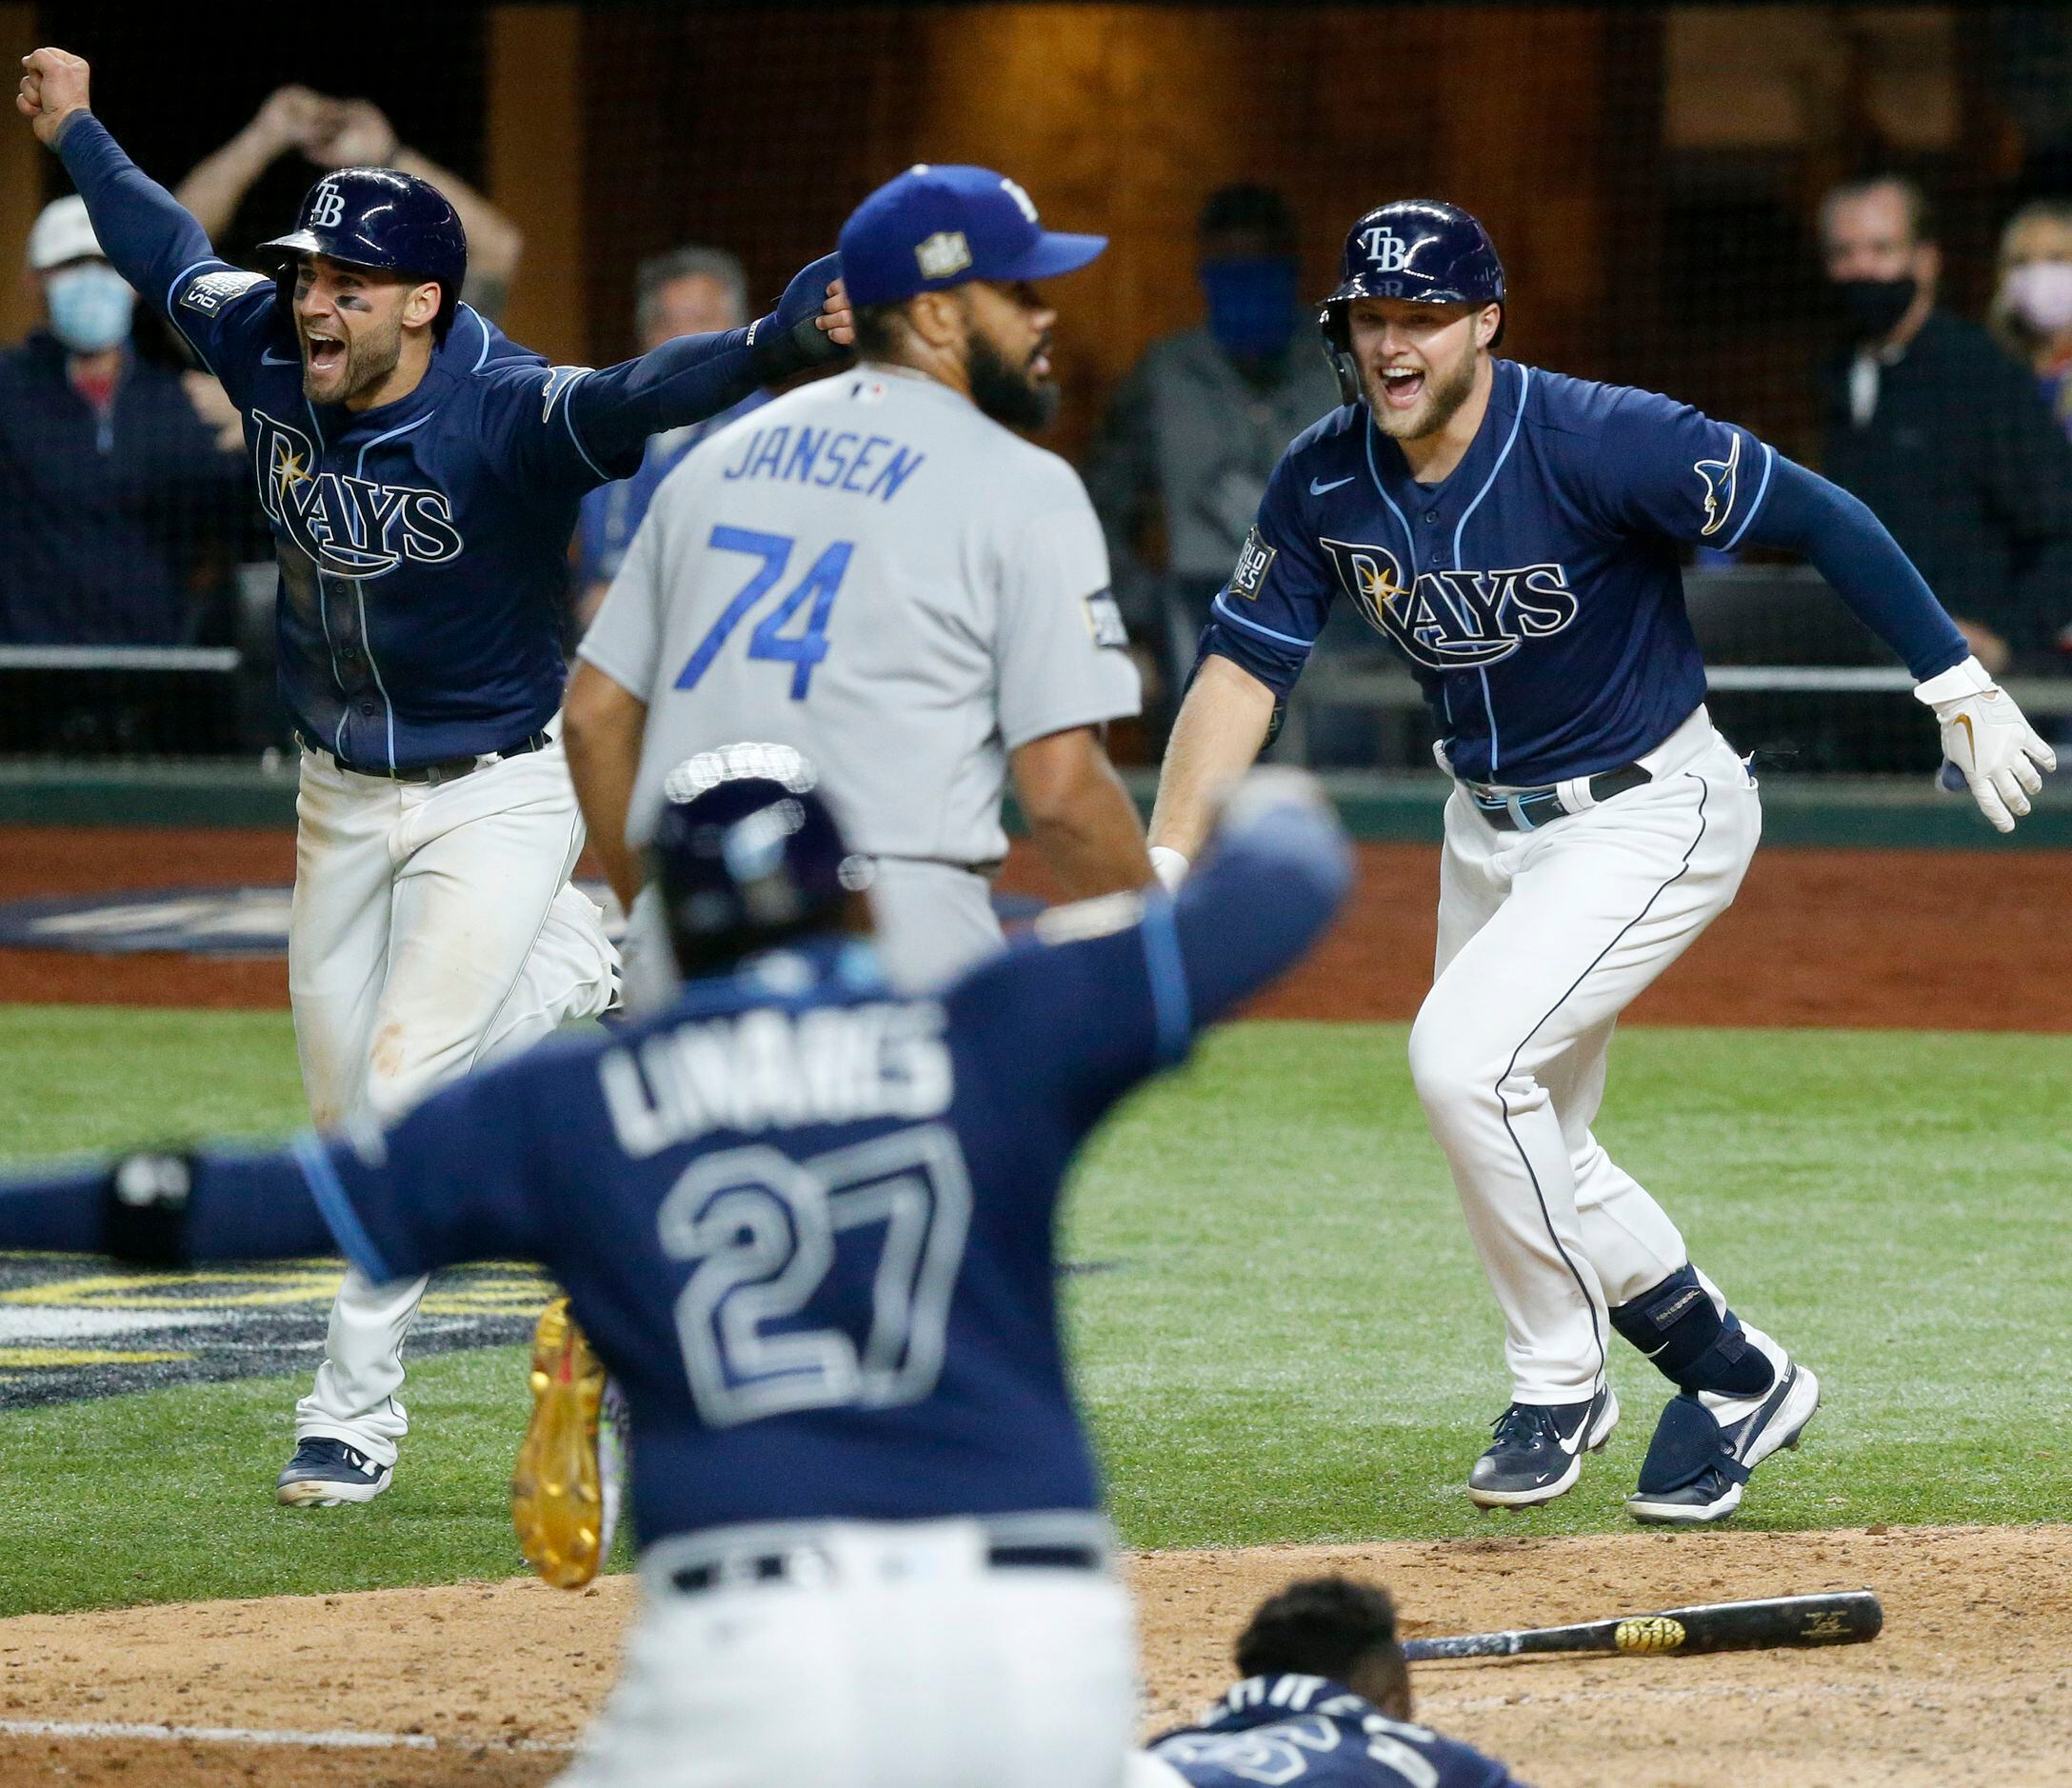 Photos: Randy Arozarena lays on home plate after game-winning run, Rays  celebrate victory over Dodgers